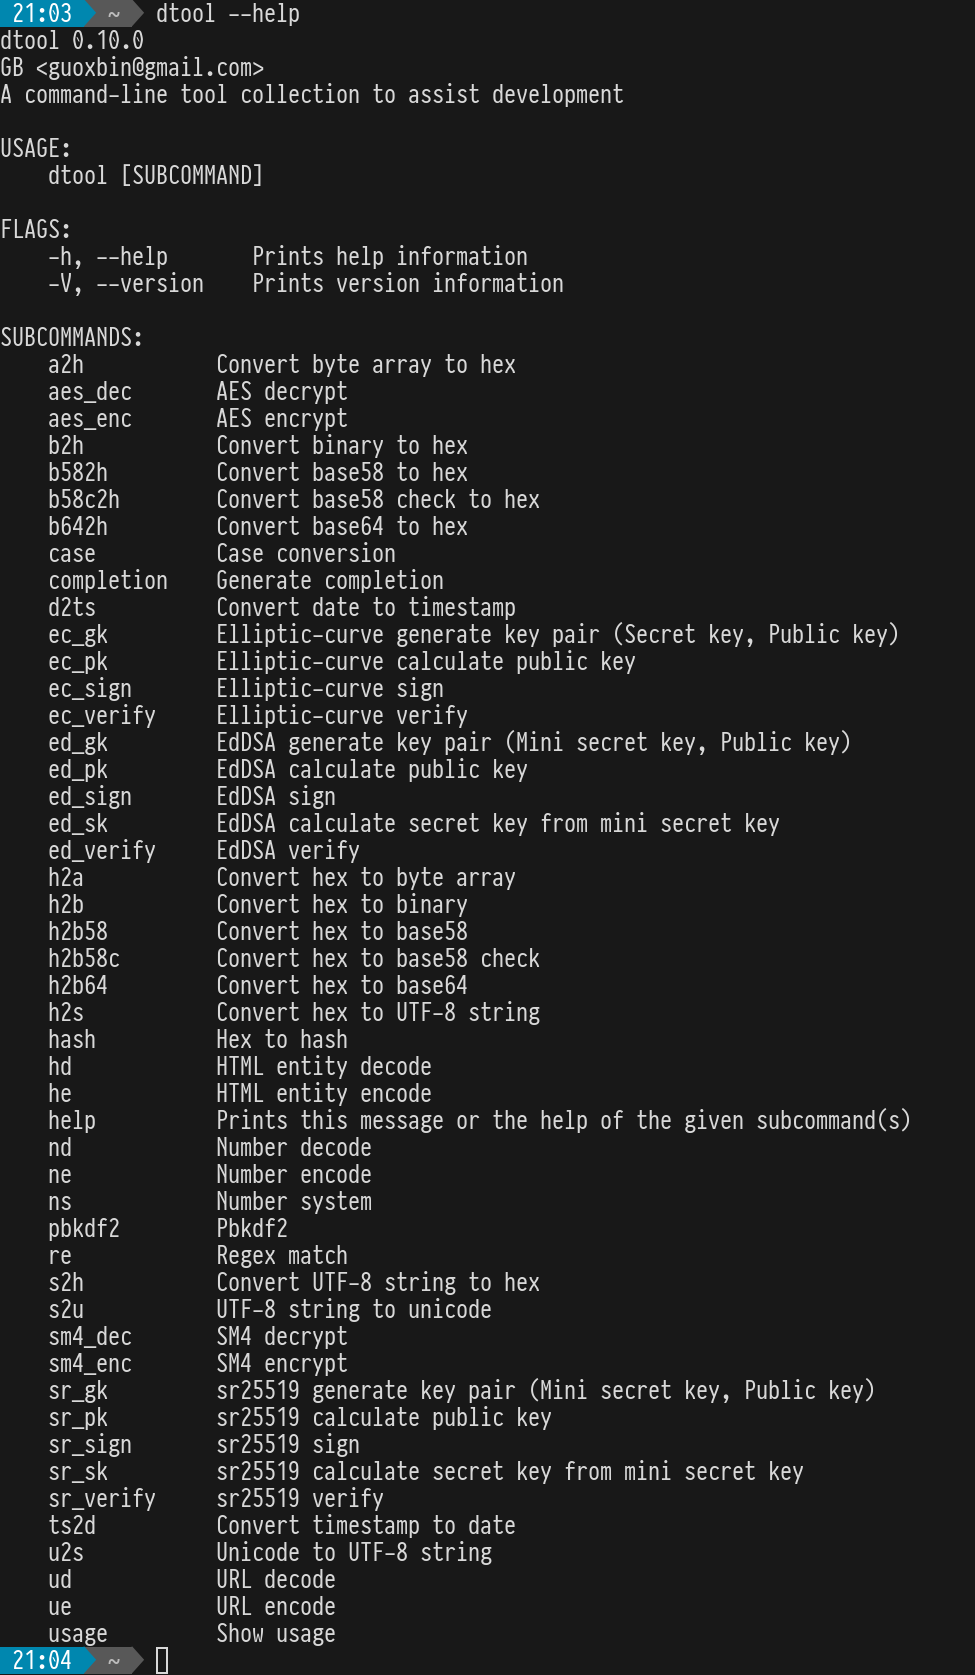 Screenshot of the output of dtool --help in a terminal.